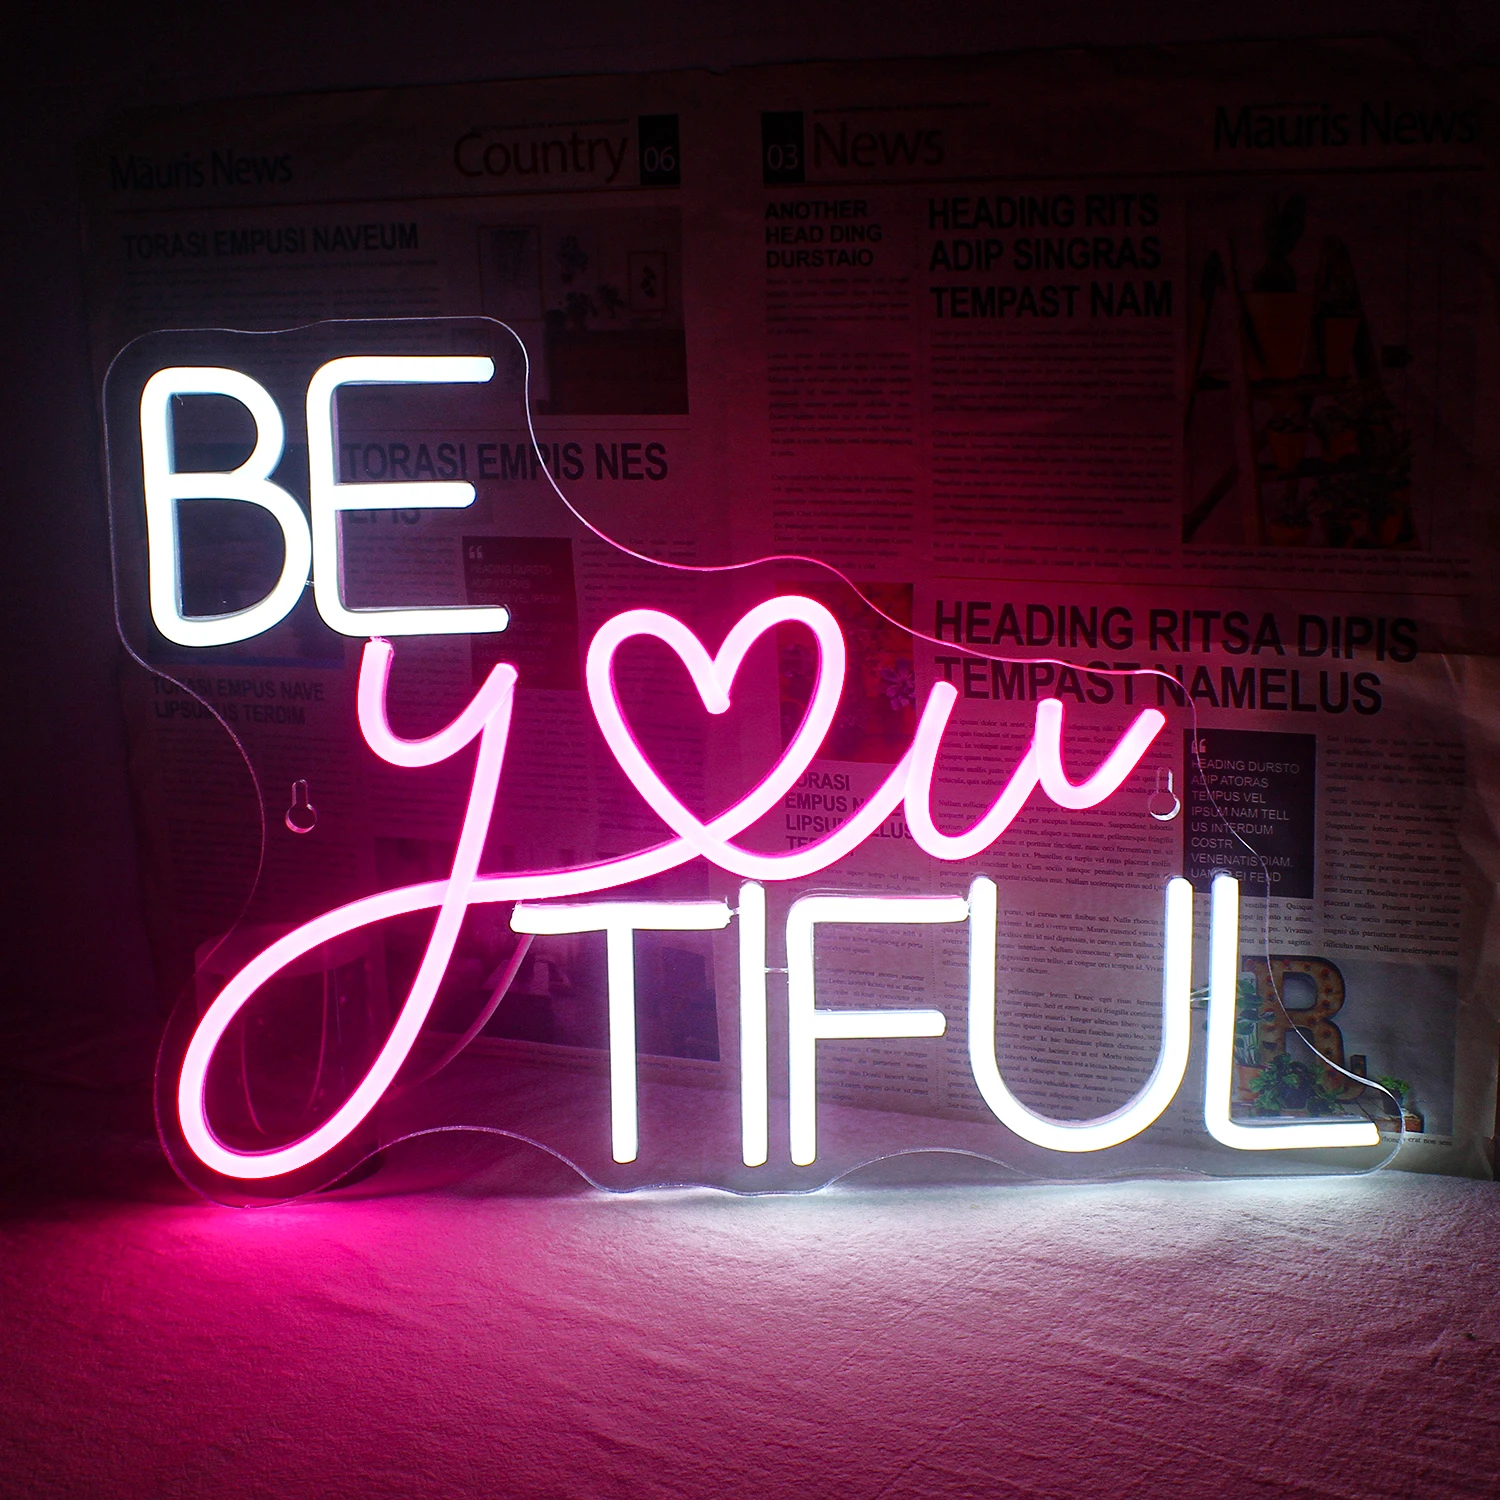 Beautiful Neon Sign LED Light Home Bar Shop Party Personalized Hang Bedroom Make up Beauty Room ART Wall Decor Lamp Girl Gift make mini 3d polarization modulator for home theater projection mini 3d polarizer system for passive 3d dlp ready projector